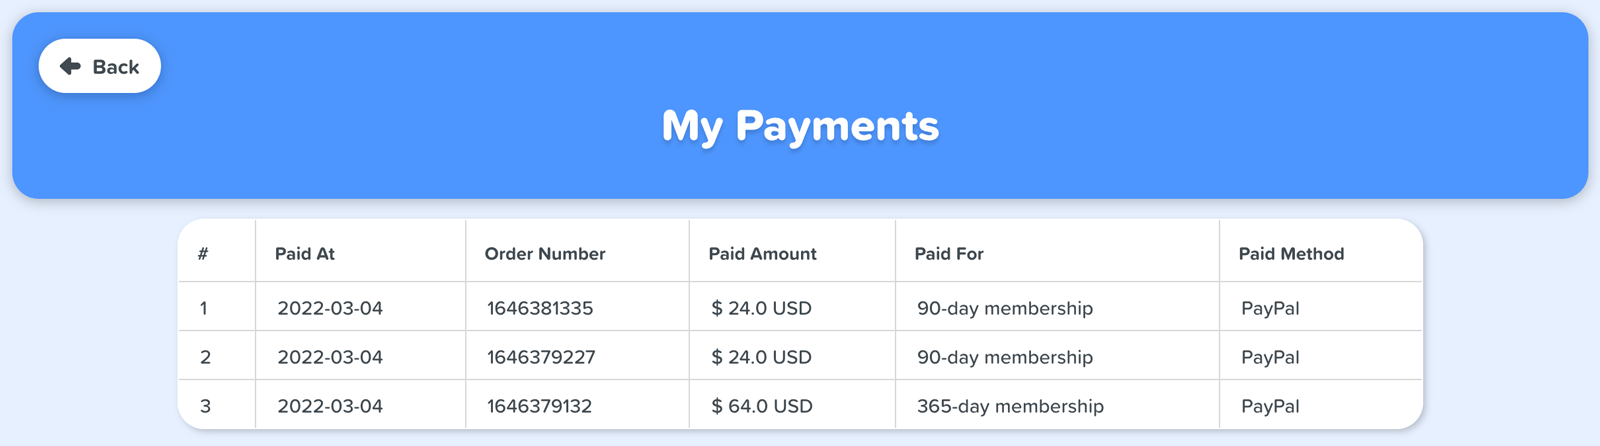 Student payments page